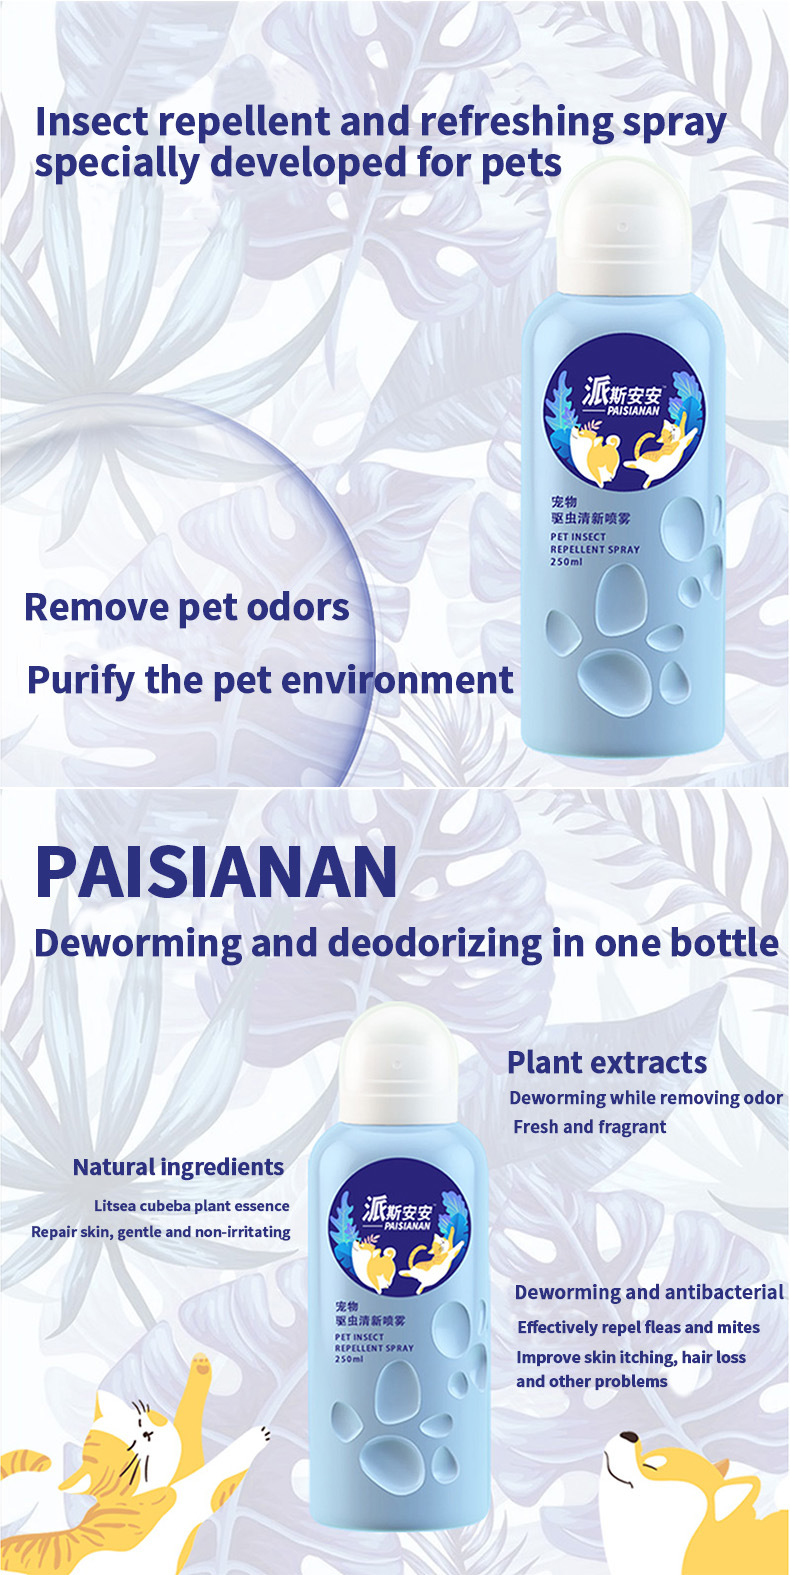 Hot Pet Products Anti Flea Mites Repel Insect Sate Natural Pet Spray for Dog